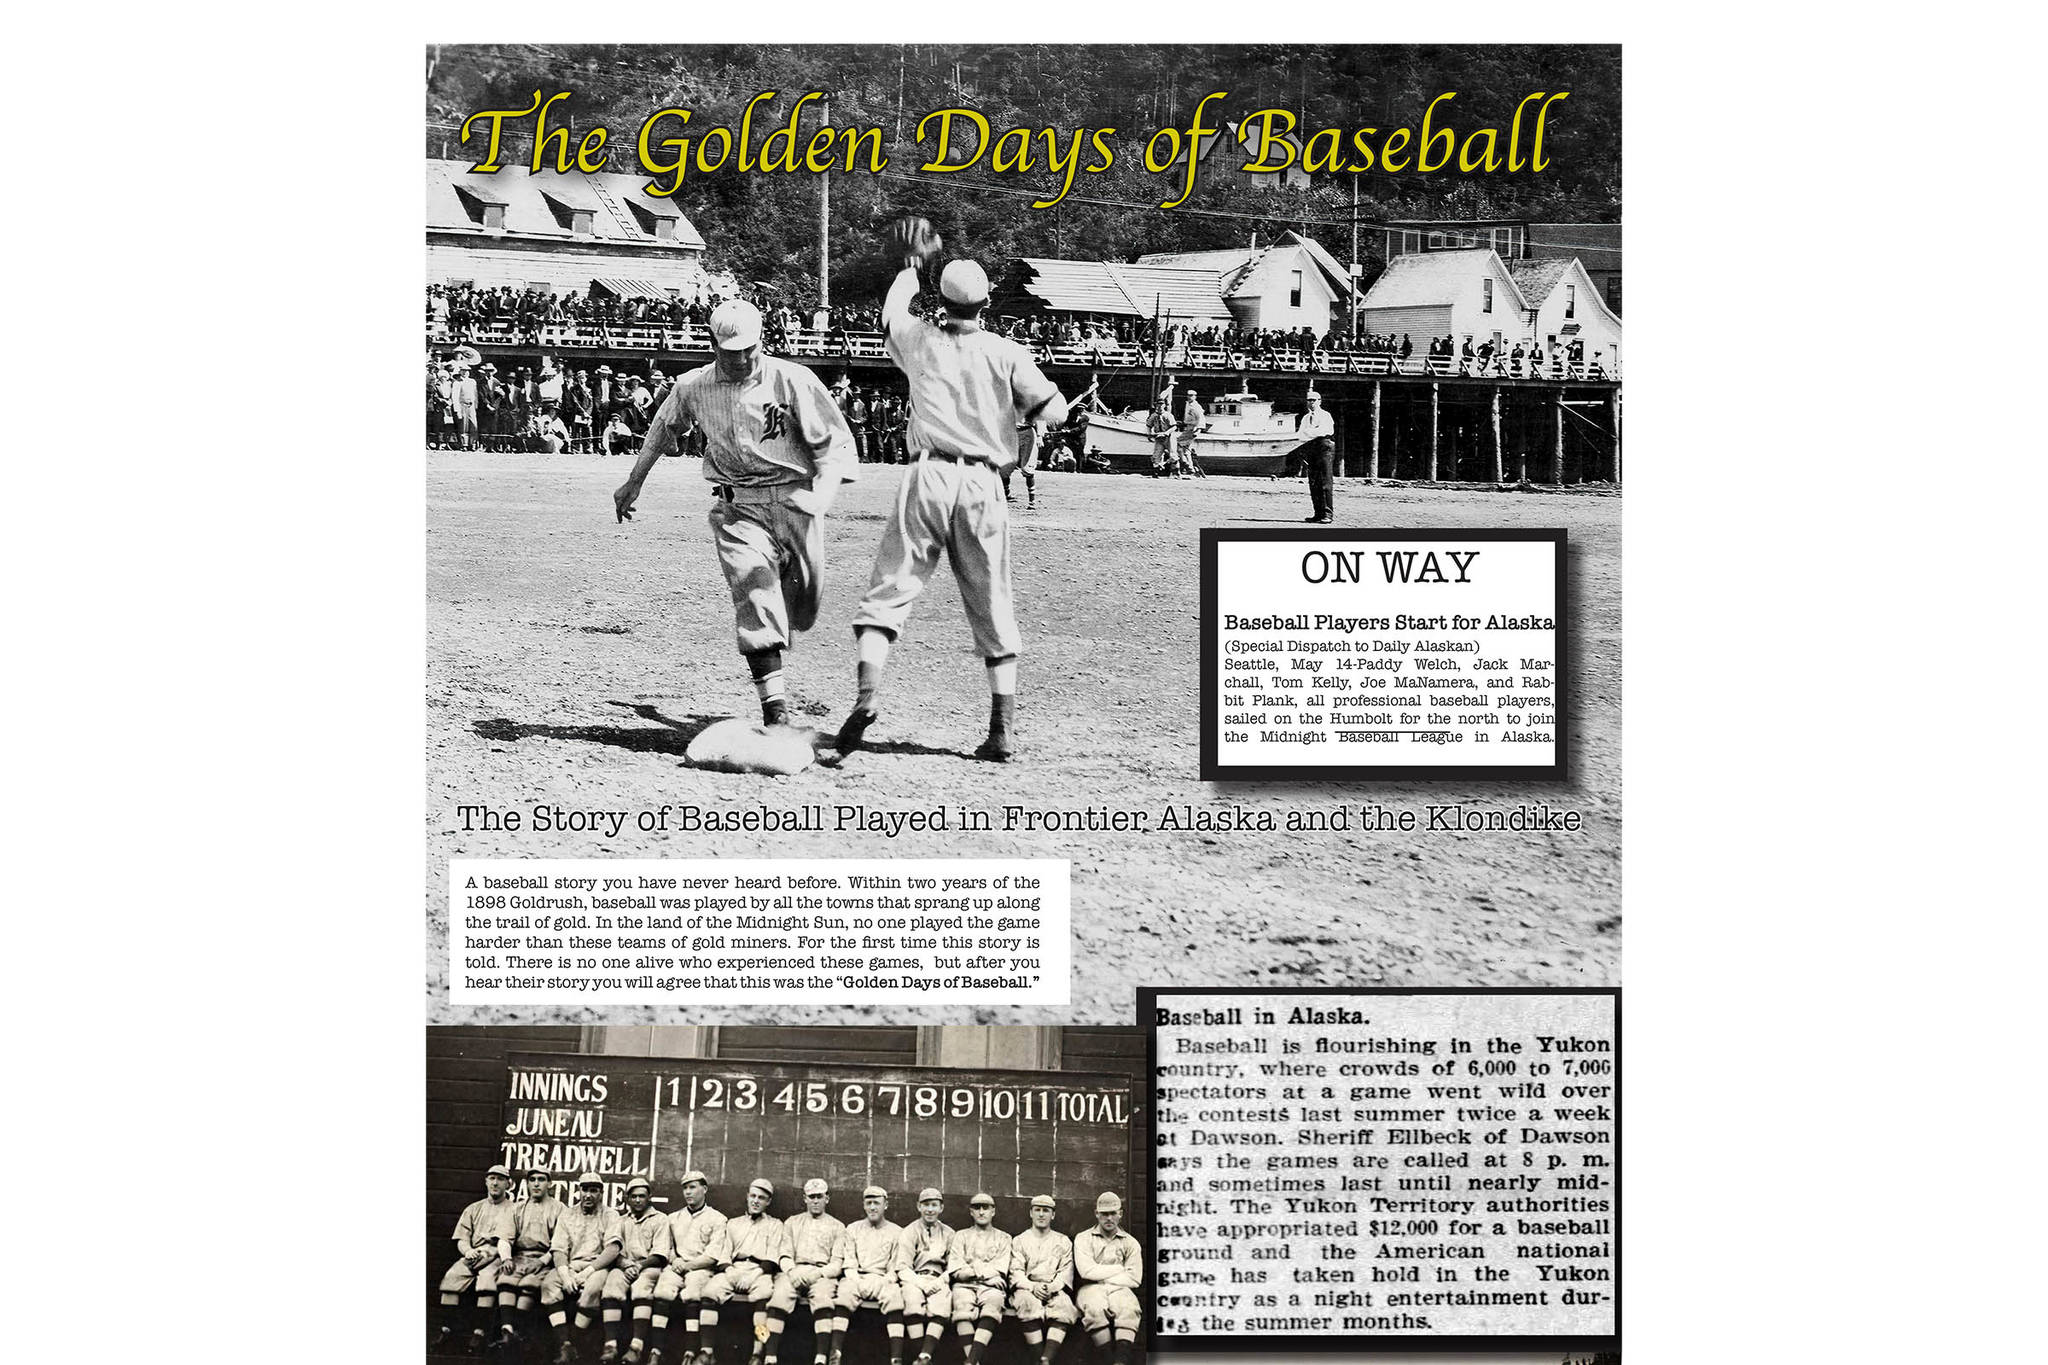 Local author Larry Johansen has written a book about the history of baseball in Alaska during the Gold Rush. The book, called "The Golden Days of Baseball, The Story of Baseball Played in Frontier Alaska and the Klondike” is the first about this previously unexplored topic. The book is available for purchase beginning May 5. (Courtesy image/Larry Johansen)